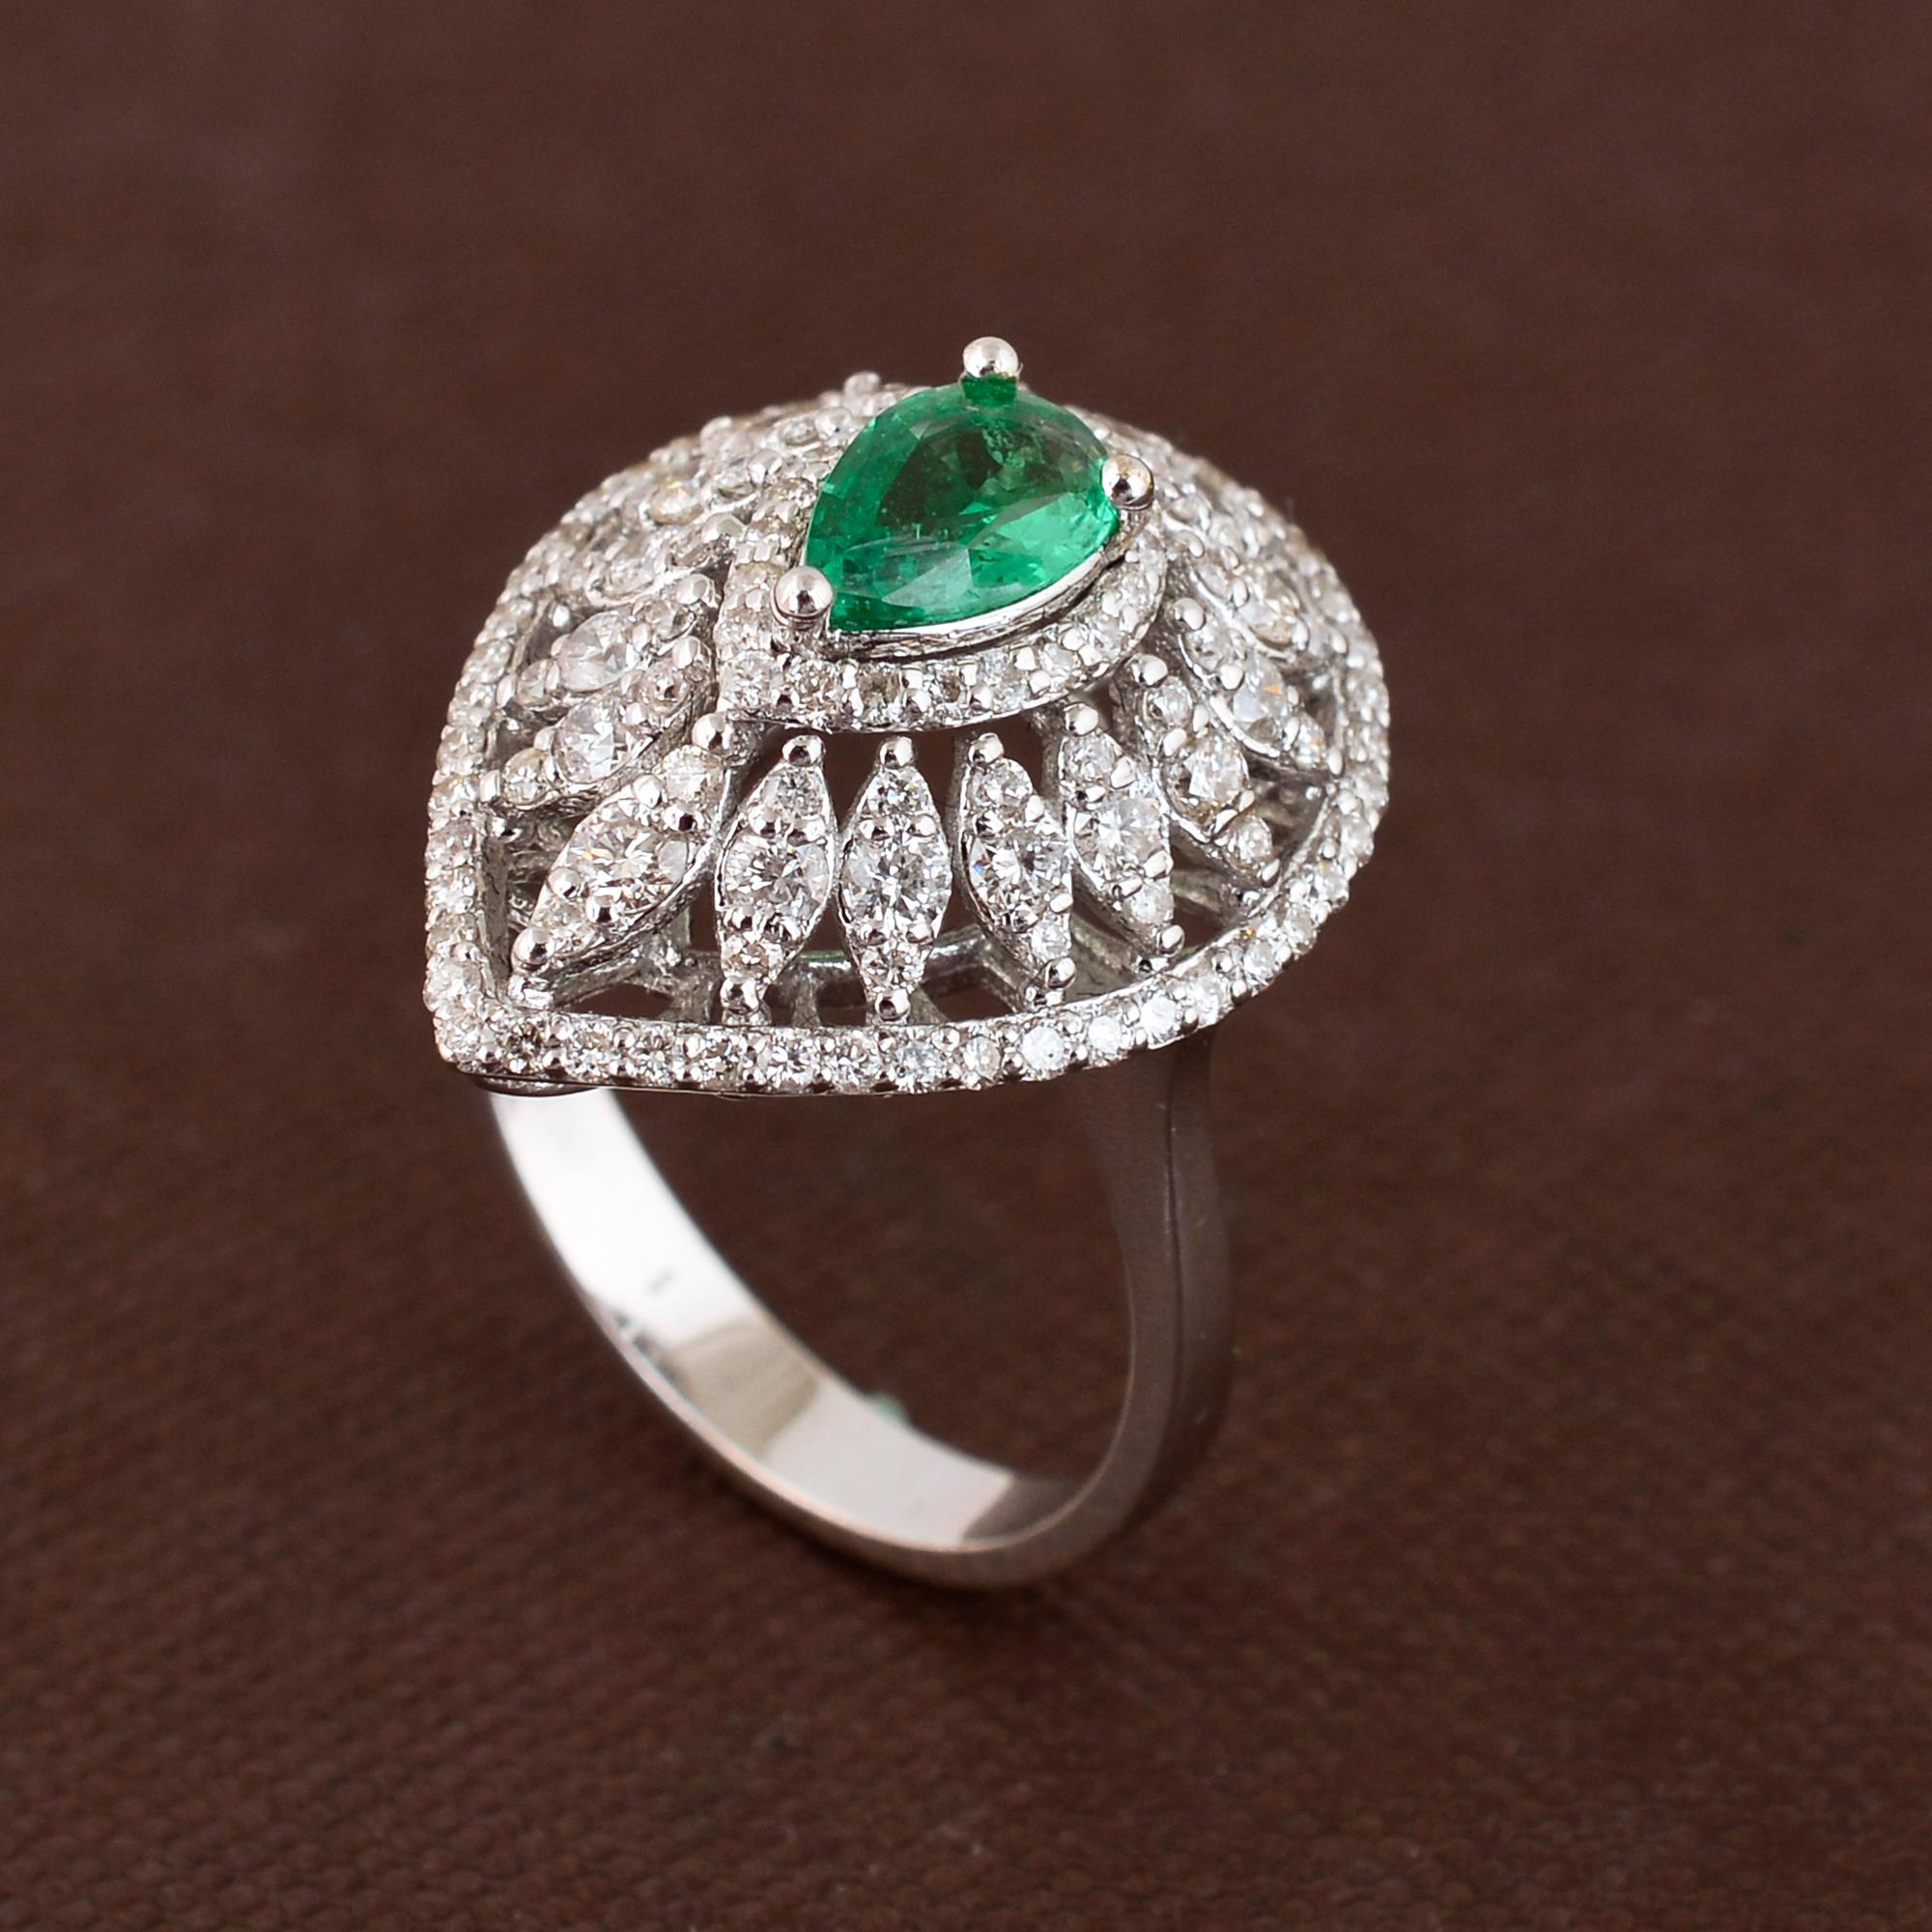 Pear Cut Real Pear Zambian Emerald Gemstone Cocktail Ring Diamond 14k White Gold Jewelry For Sale